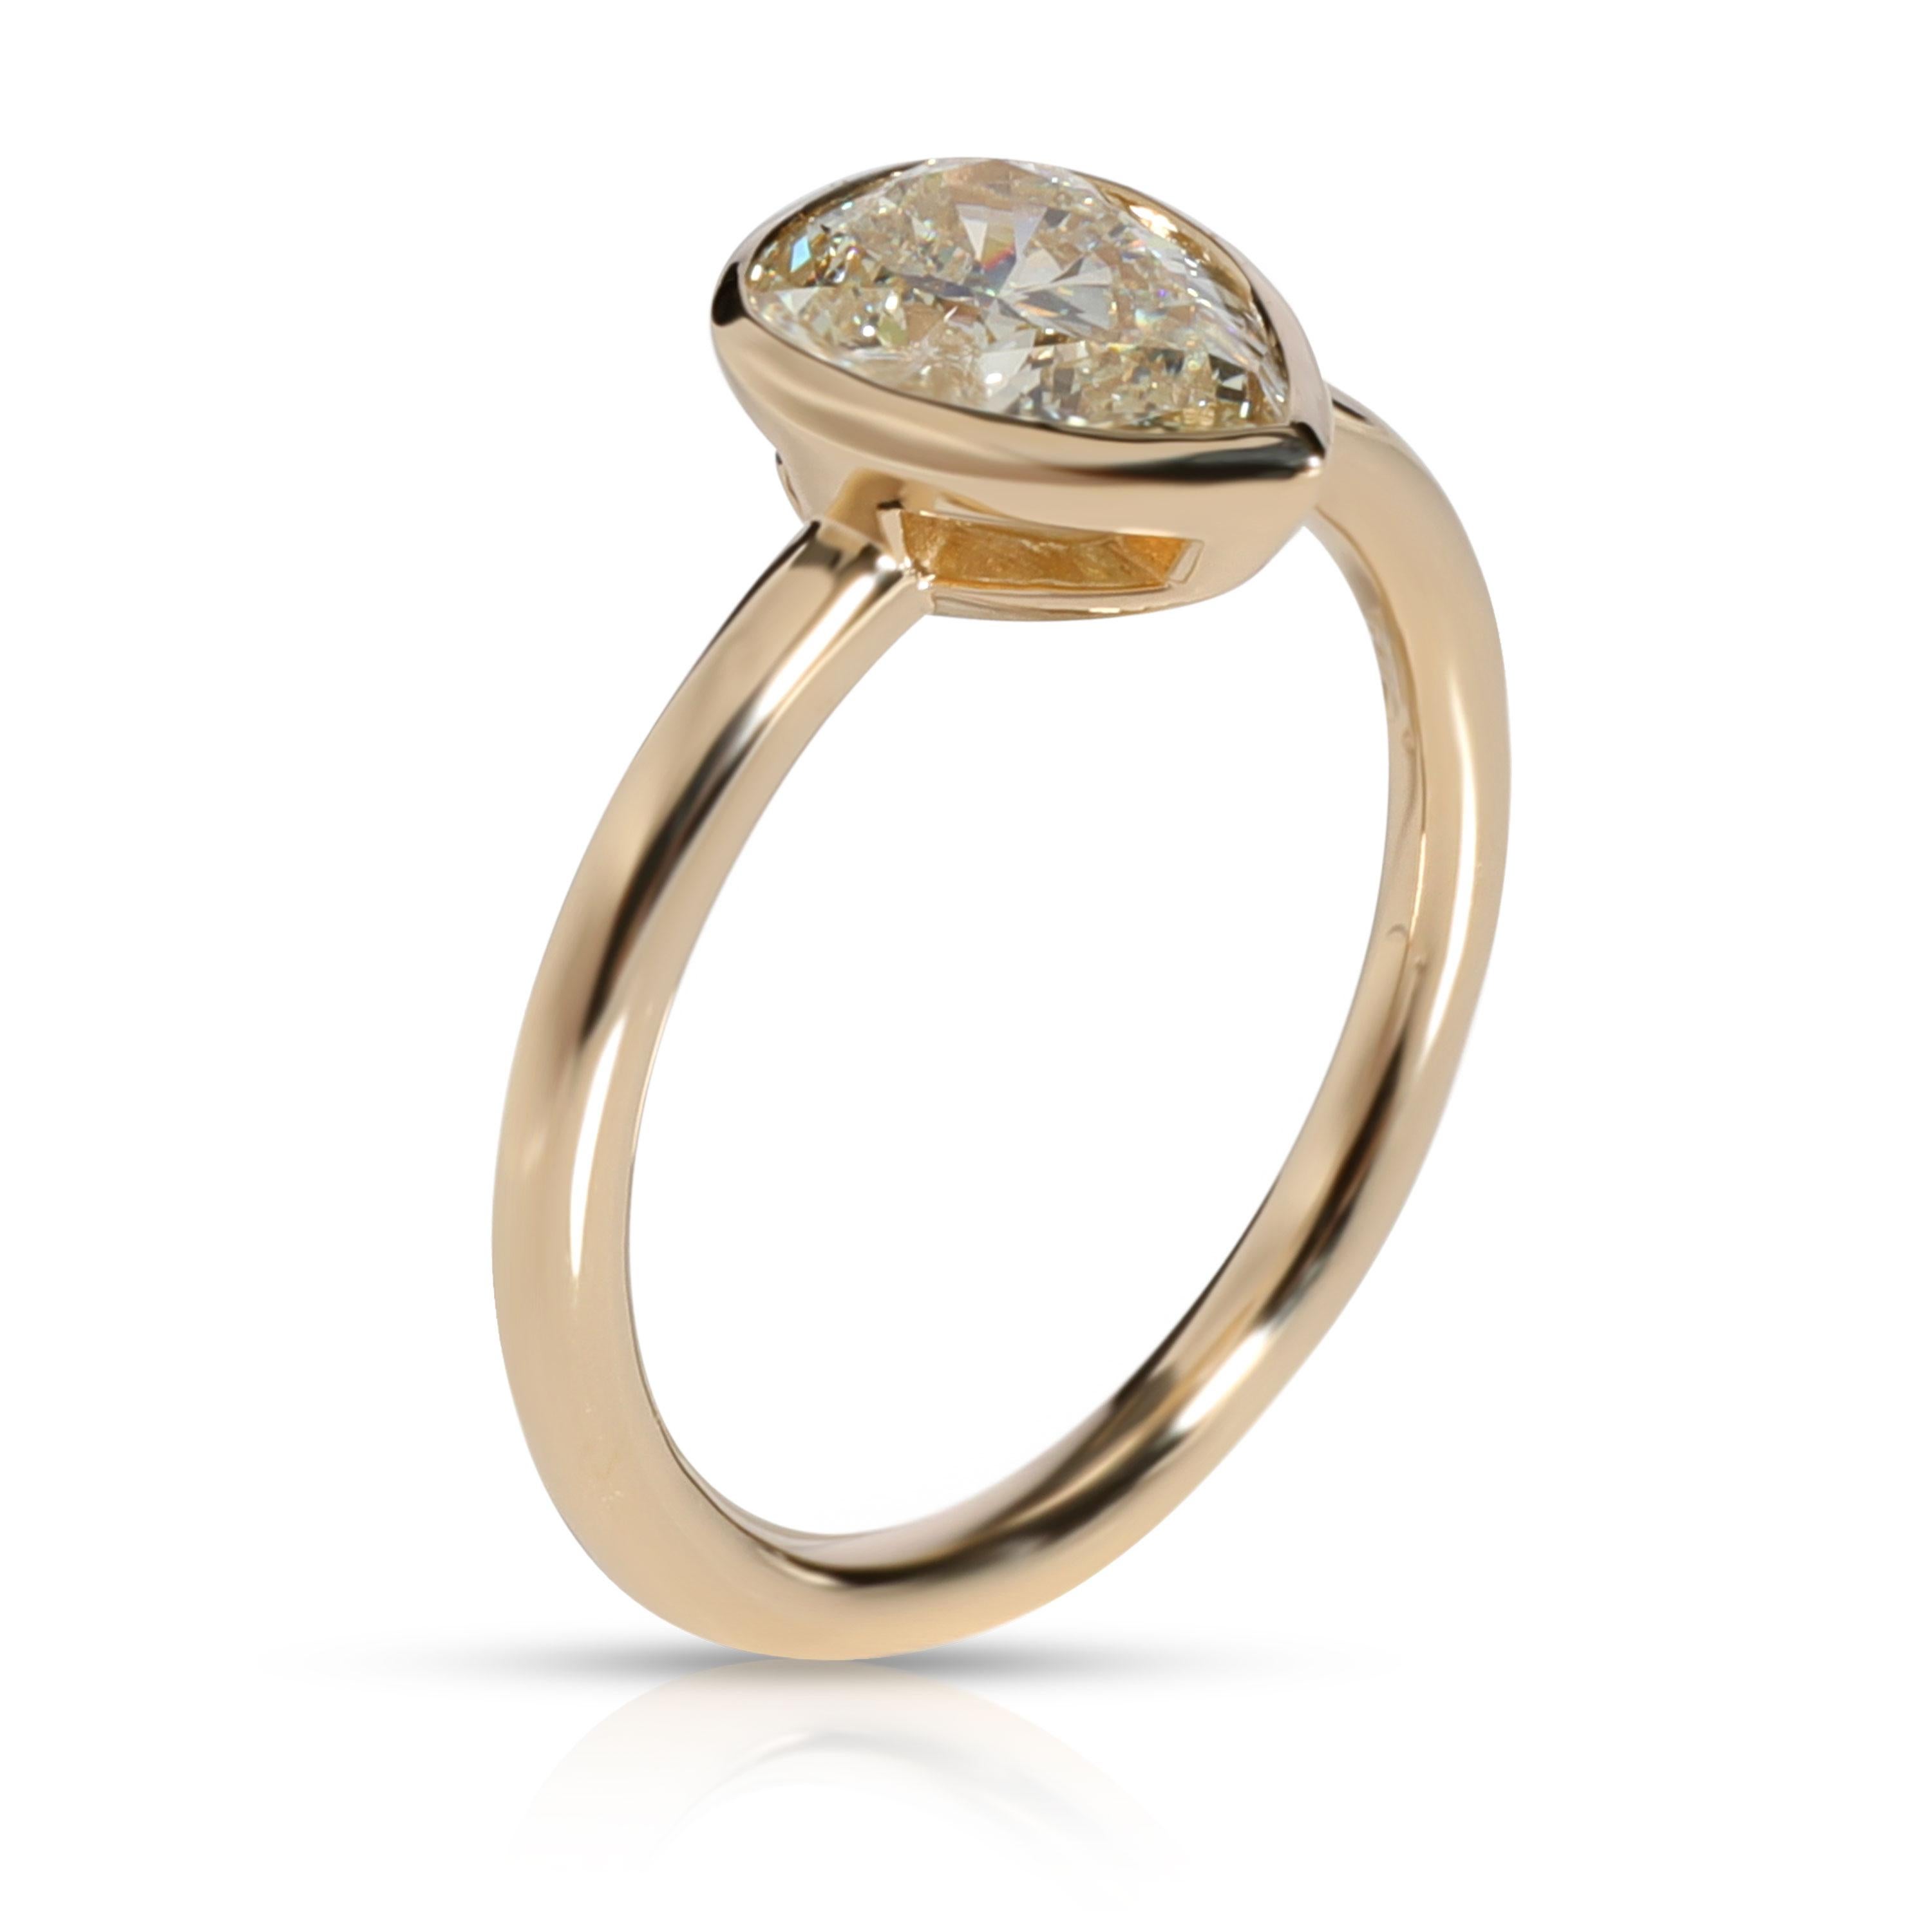 GIA Certified Bezel Set Diamond Solitaire Ring in 14K Yellow Gold L I2 1.52 CTW

SKU: 105966

In excellent condition and recently polished. Ring size is 6.5. Comes with the original GIA Certificate.

Metal Type: Yellow Gold
Metal Purity: 14K
Ring